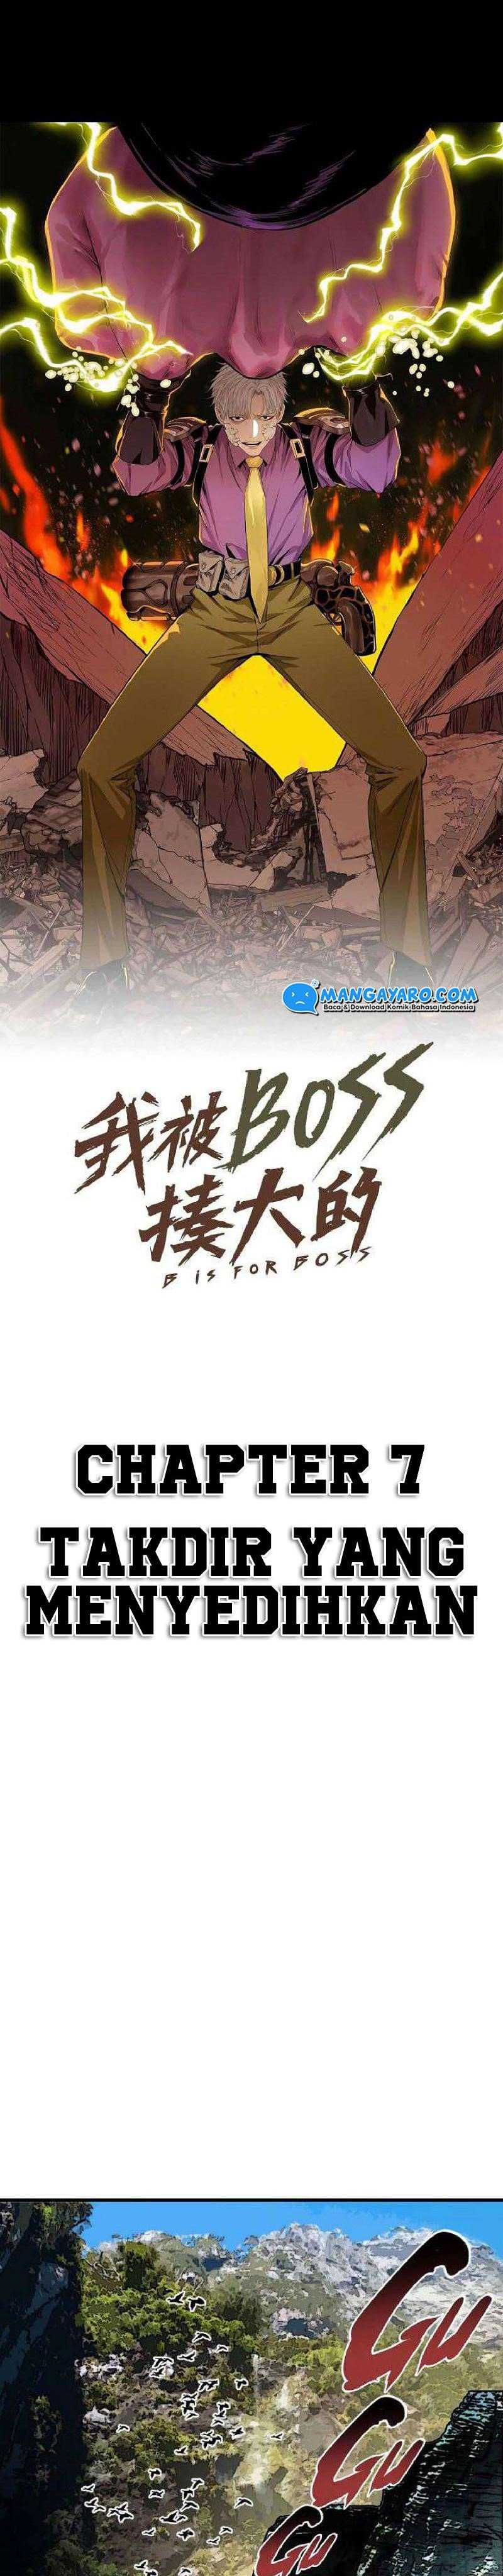 I Was Beaten Up By The Boss Chapter 7